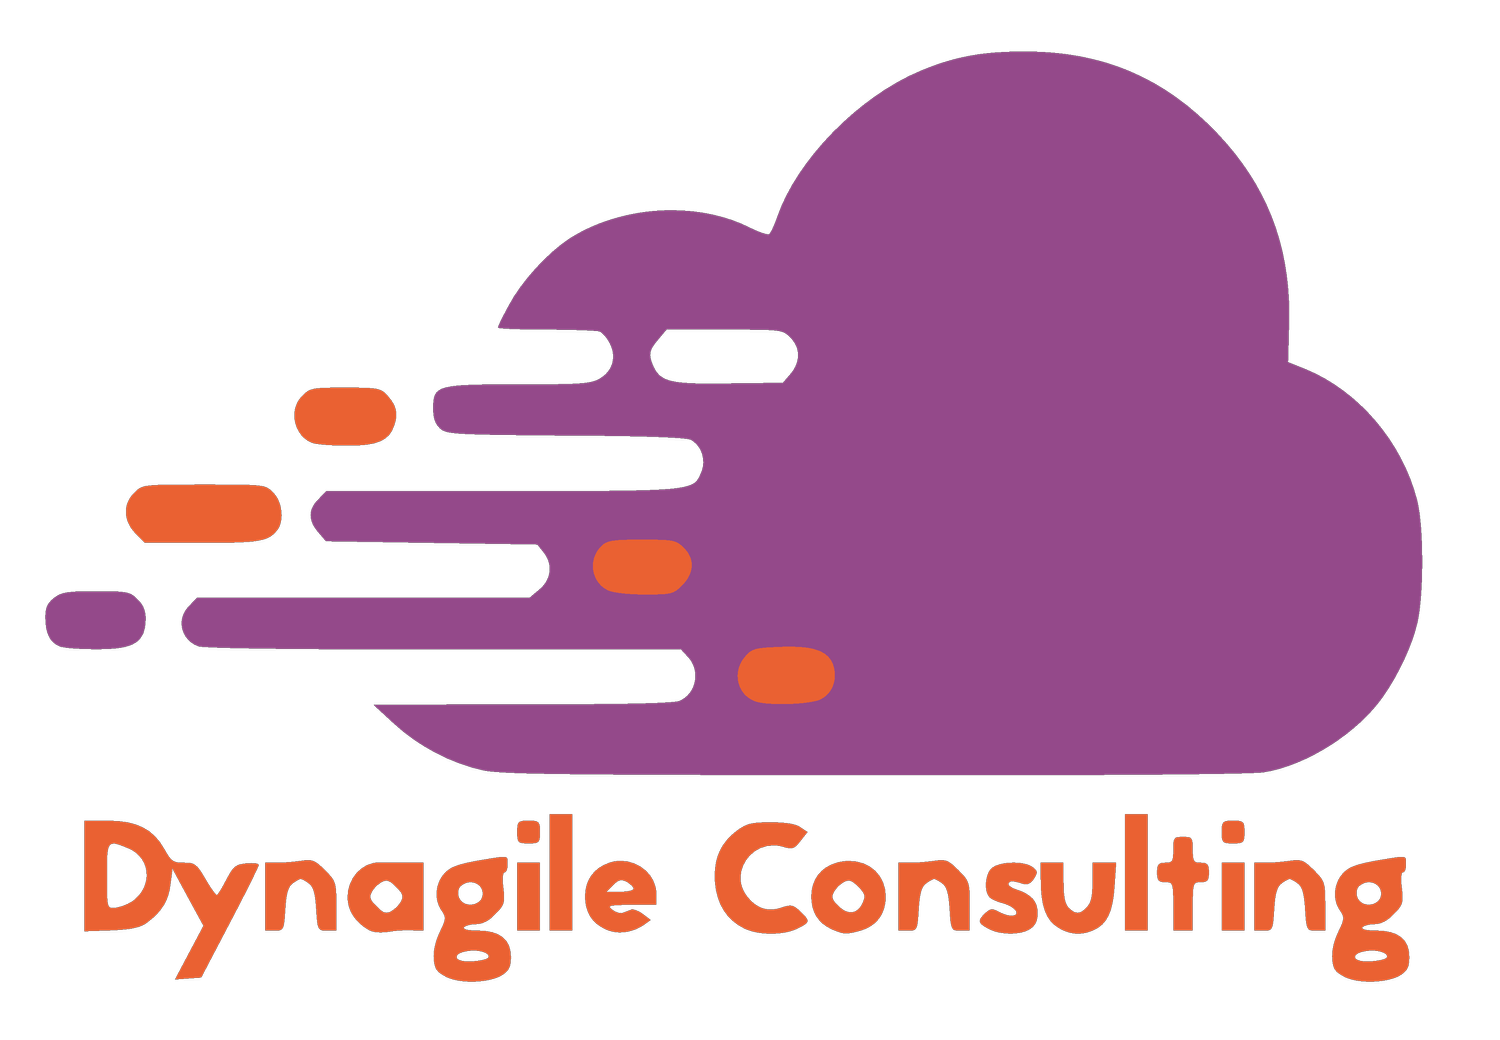 Dynagile Consulting